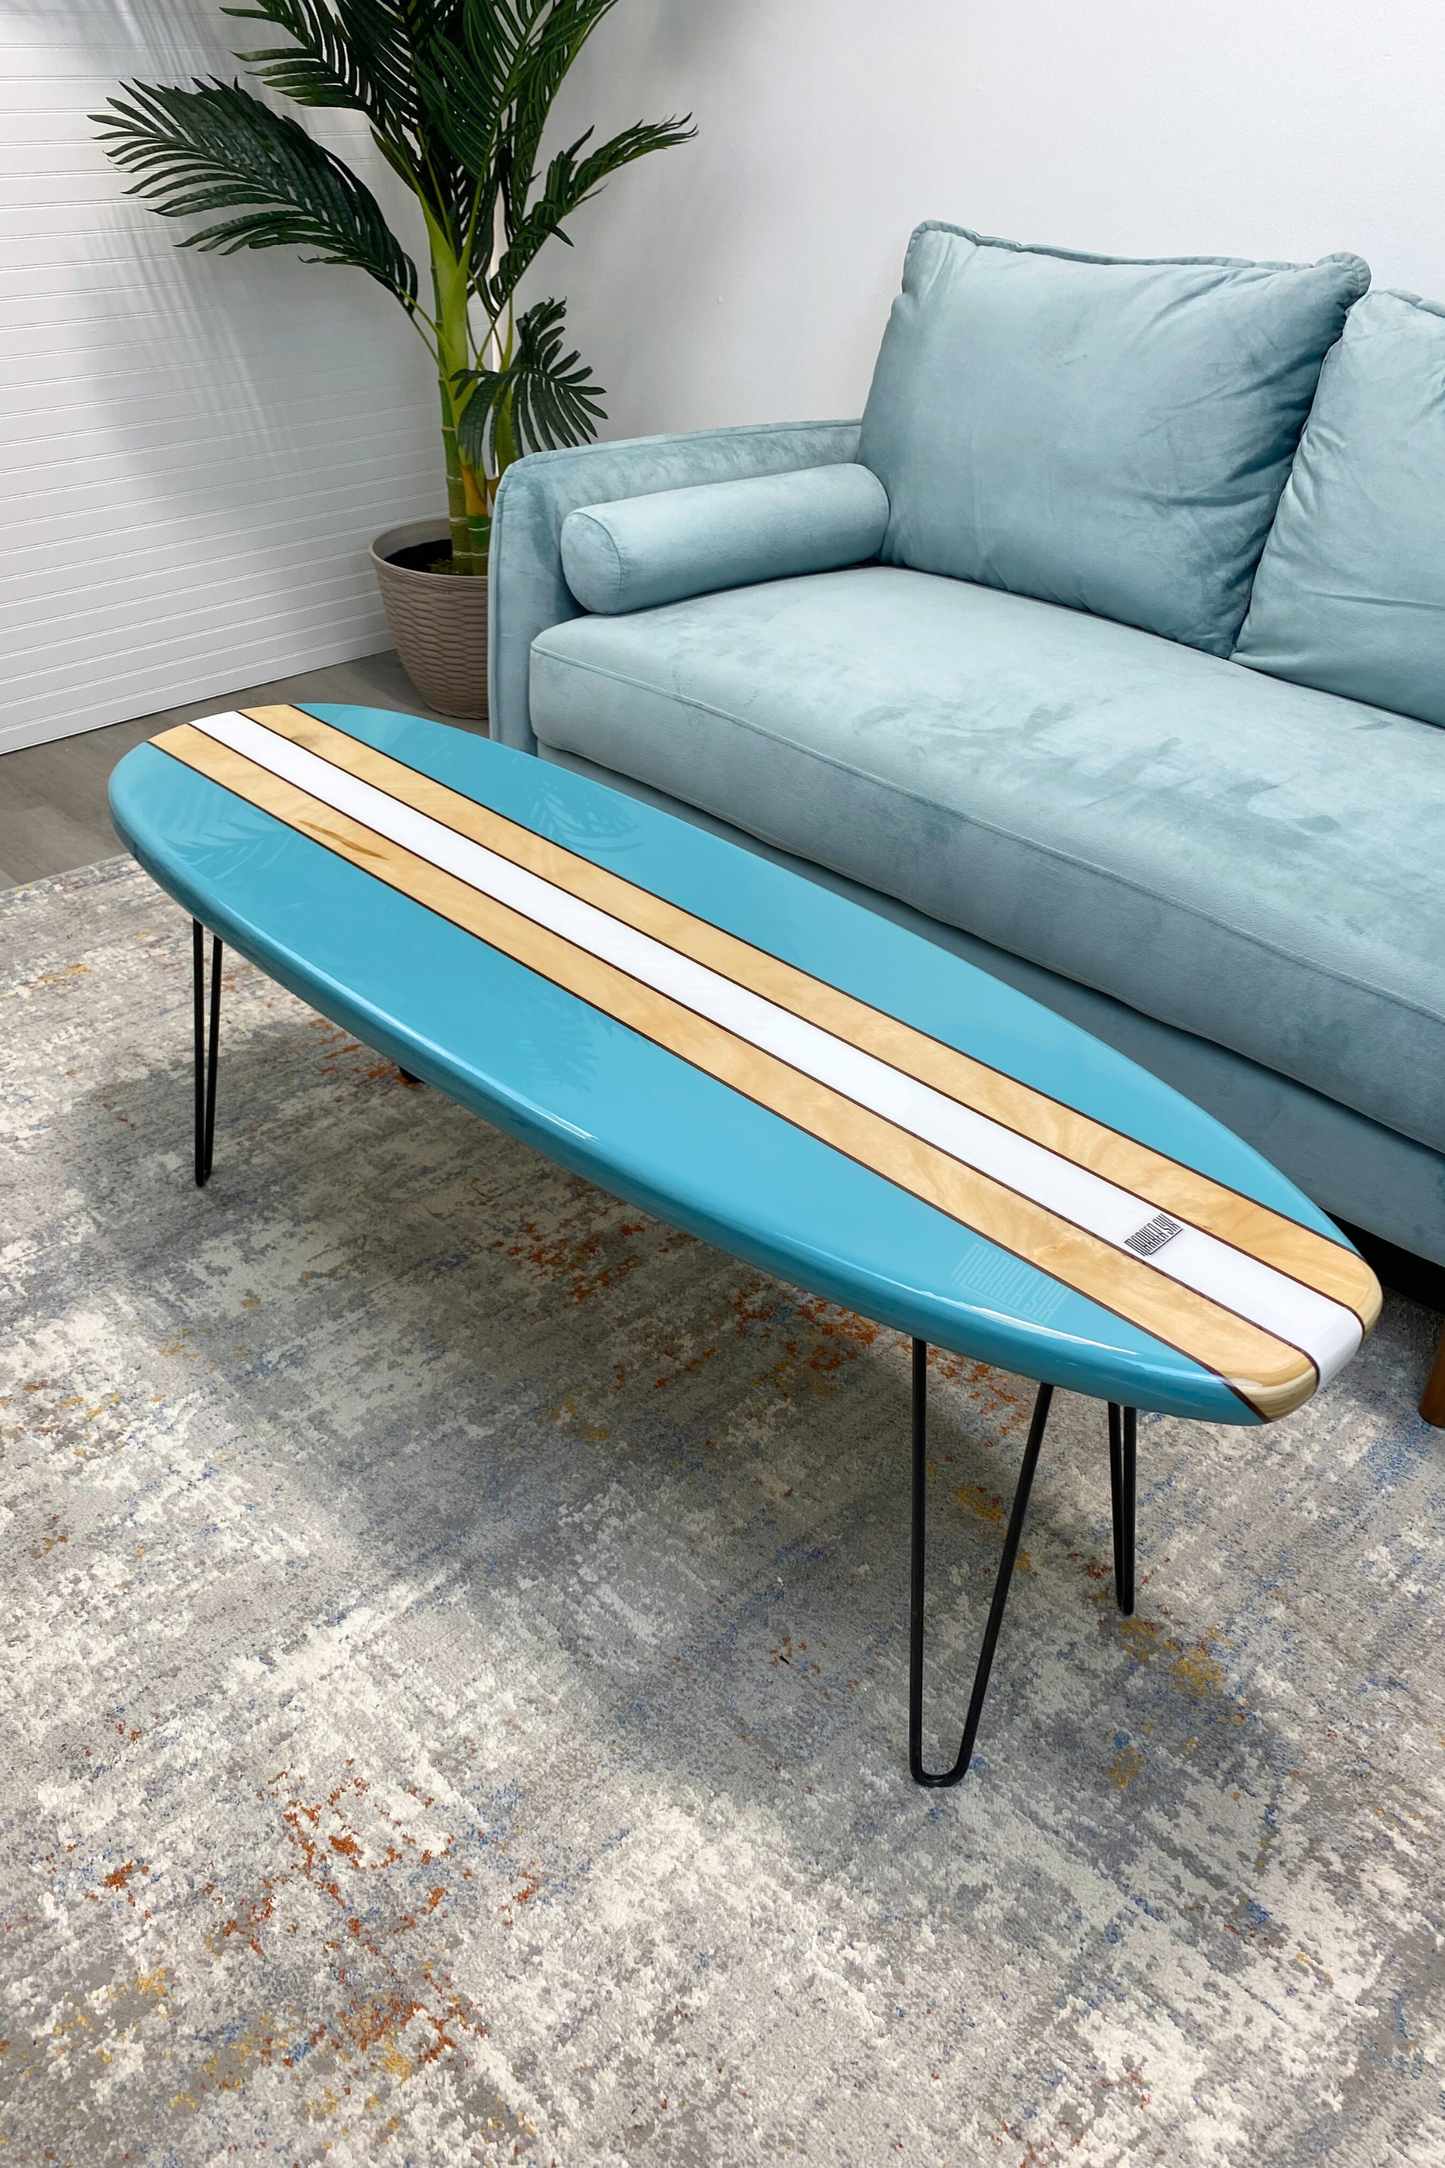 The King Tide Surfboard Coffee Table